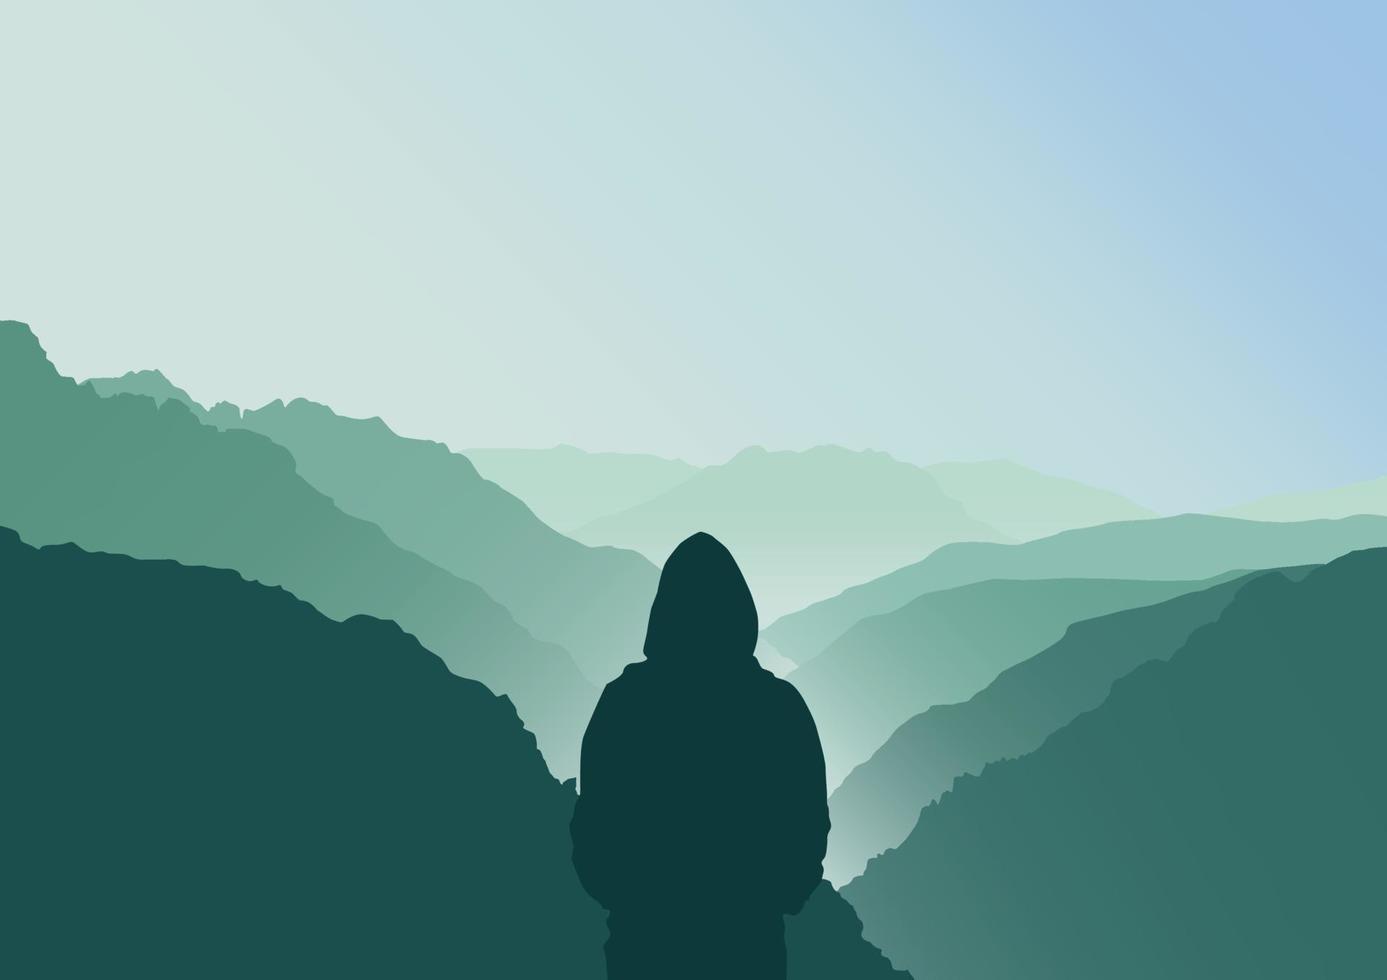 silhouette of a person in the mountains, vector illustration.